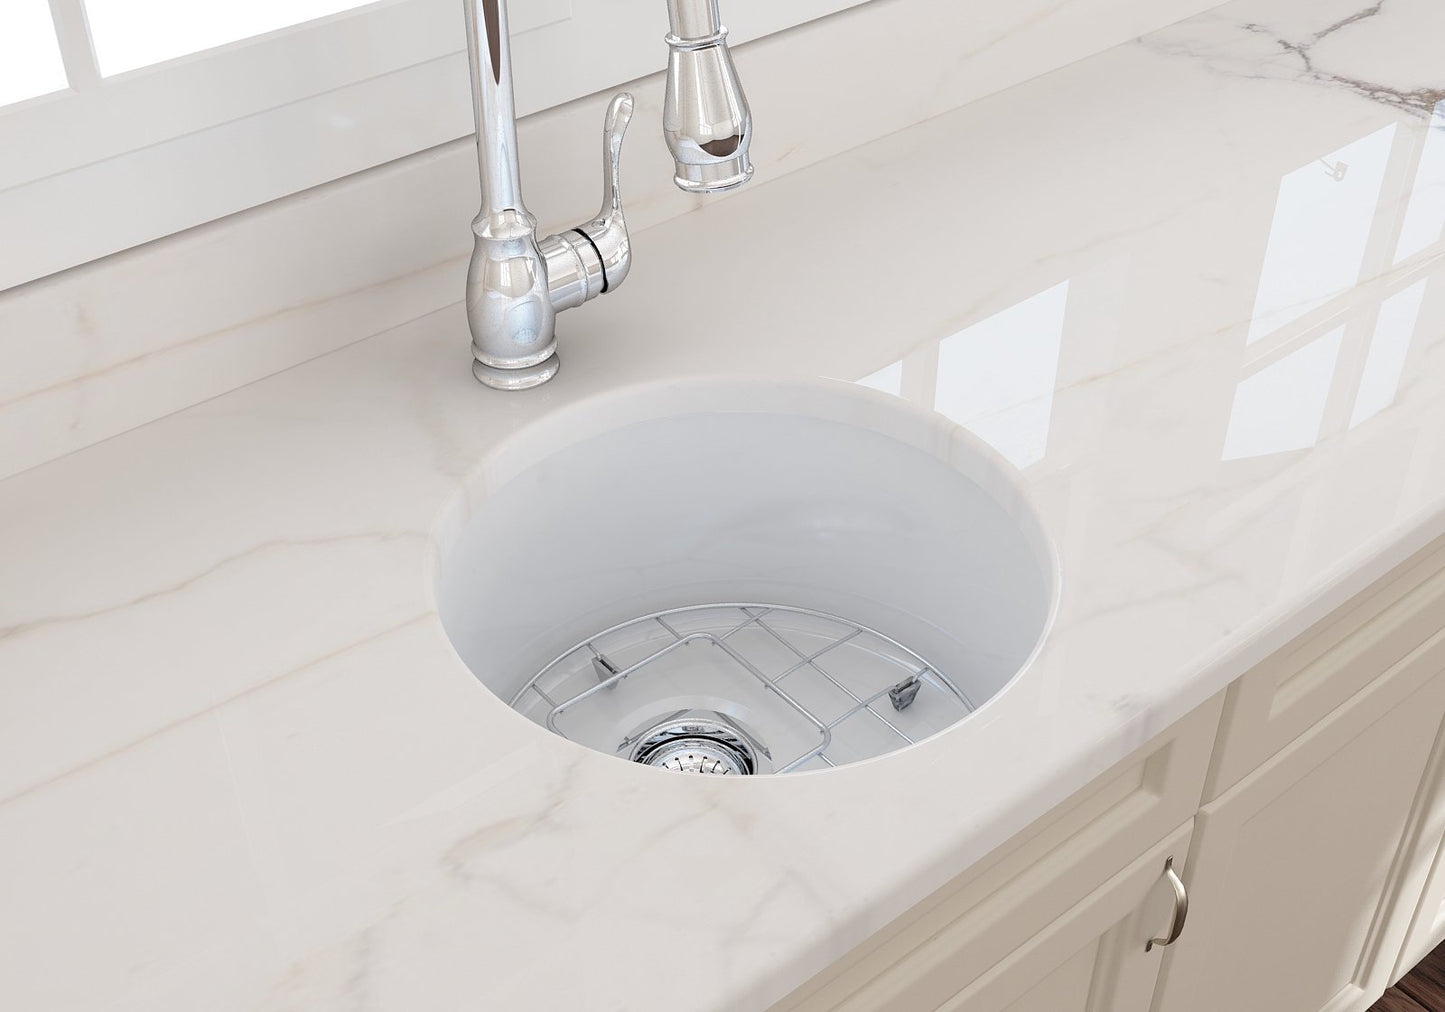 Bocchi Undermount Fireclay 18" Round Single Bowl Kitchen Sink (Call for special pricing)